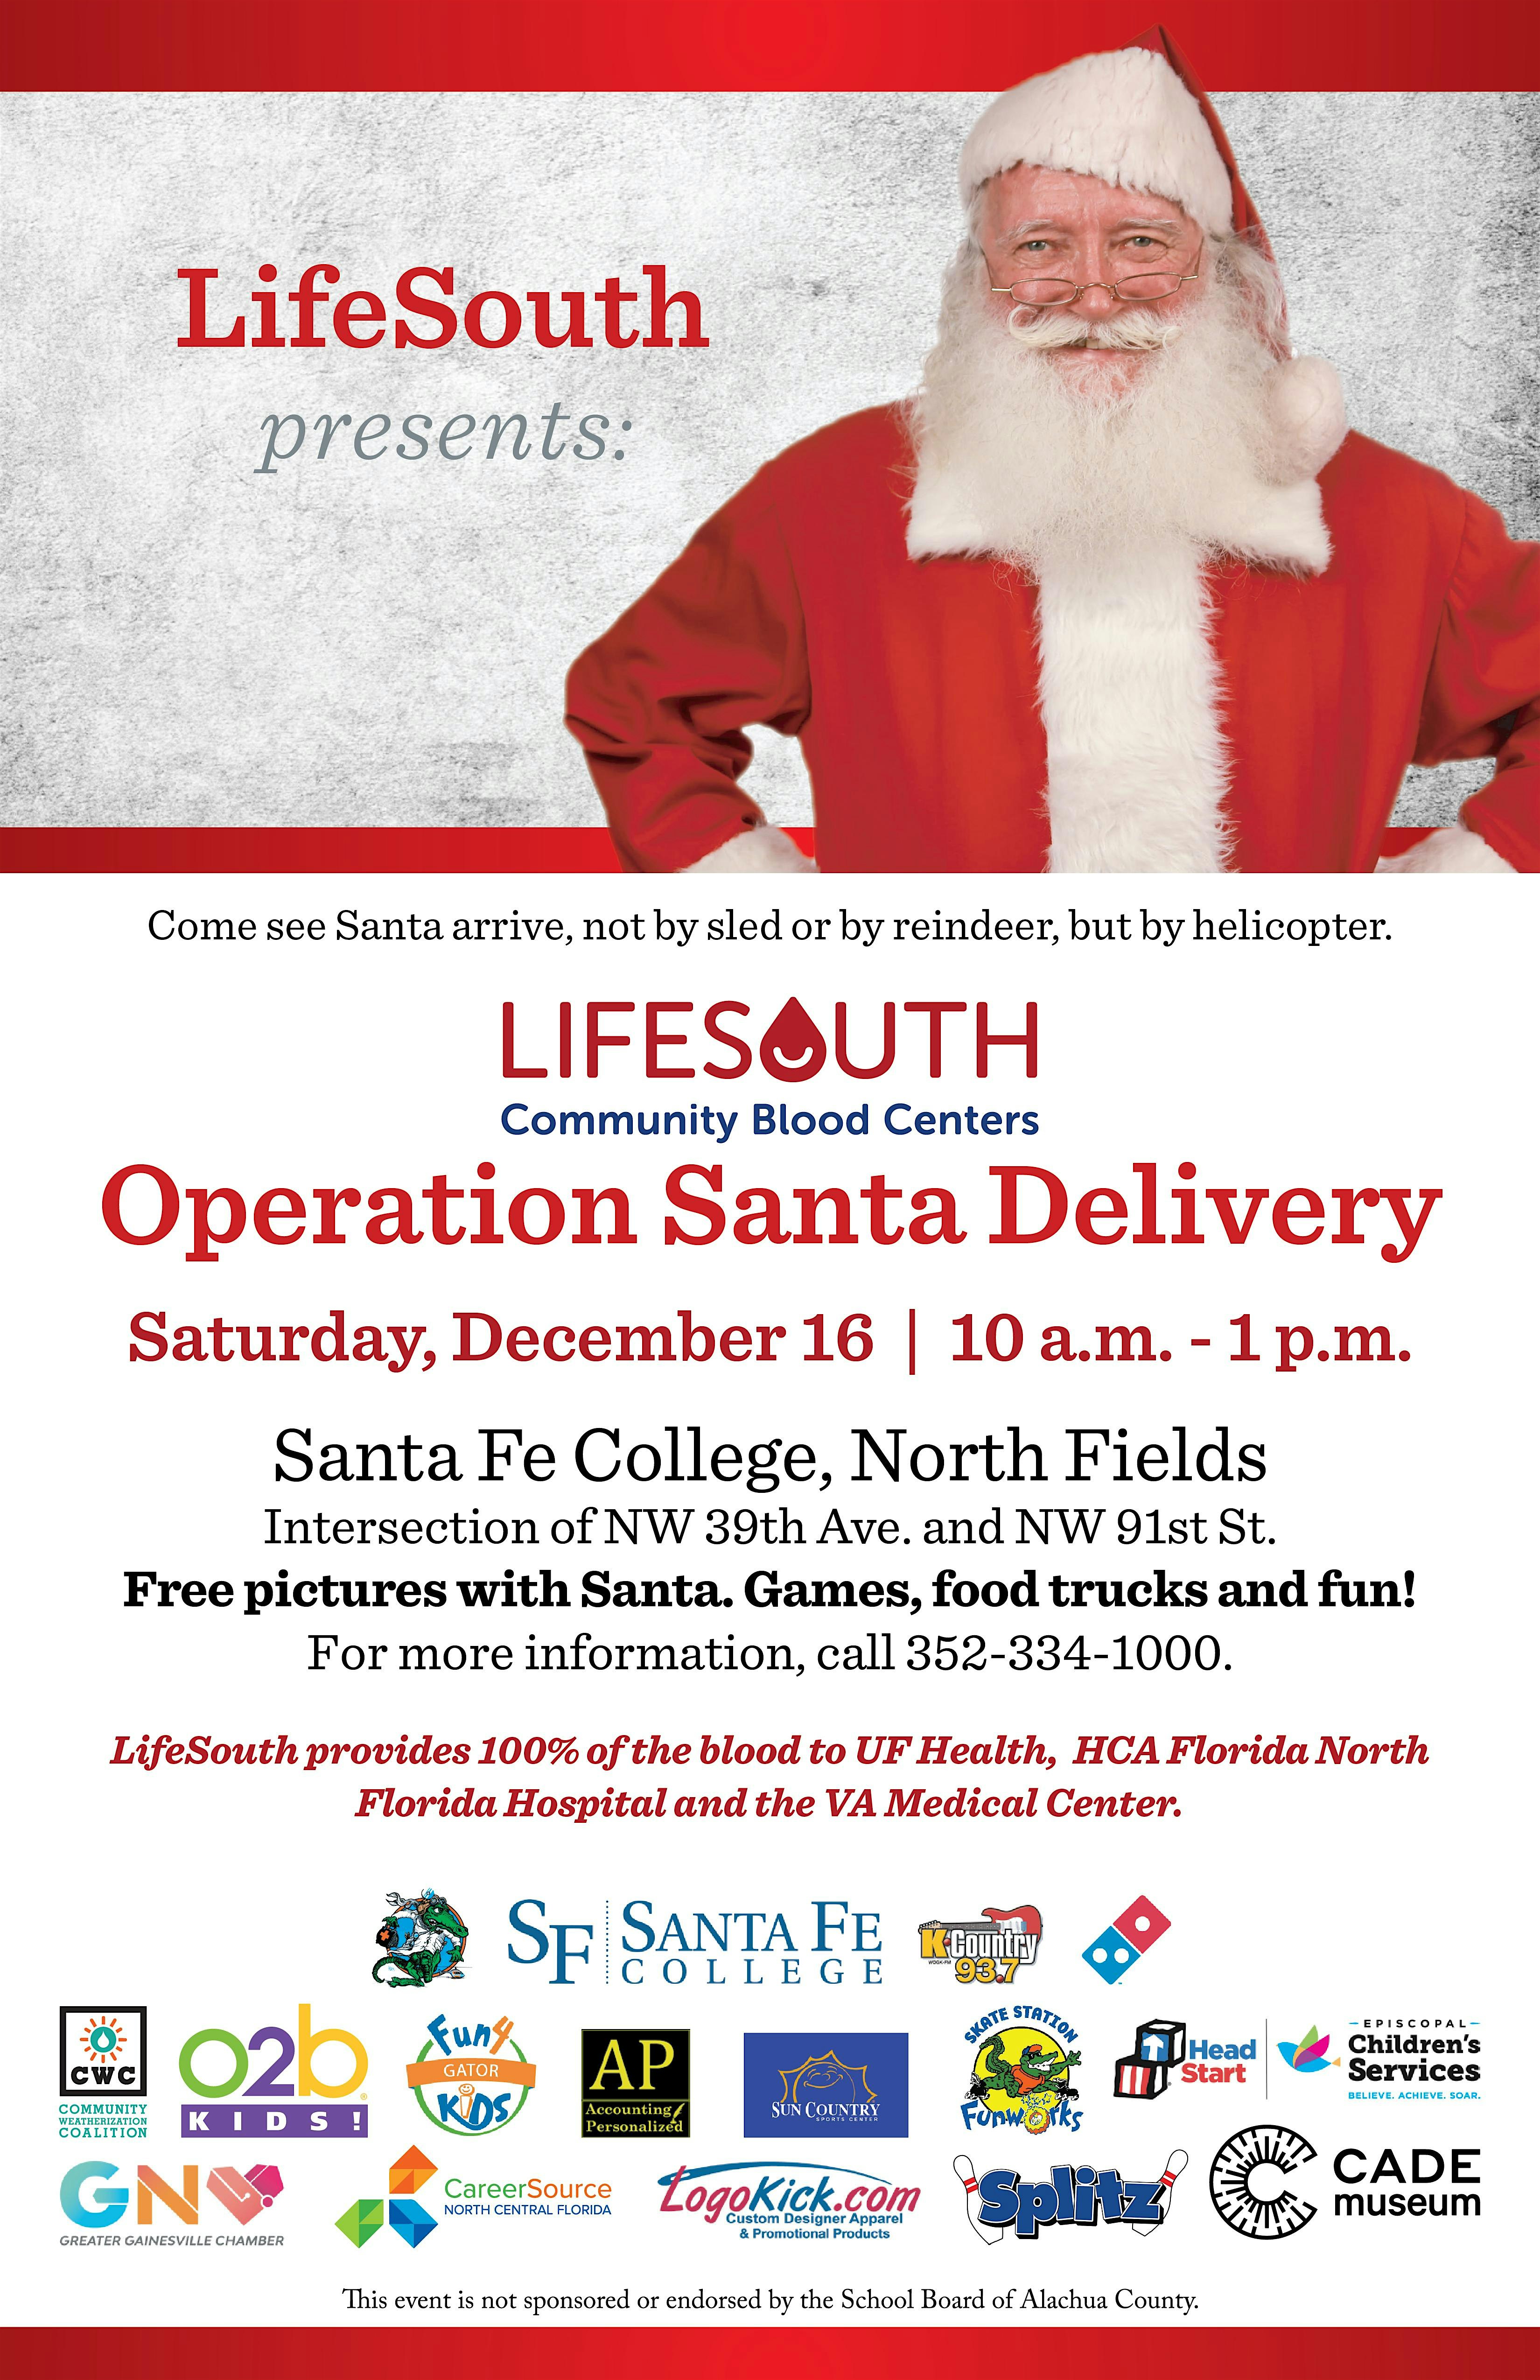 LifeSouth's Operation Santa Delivery